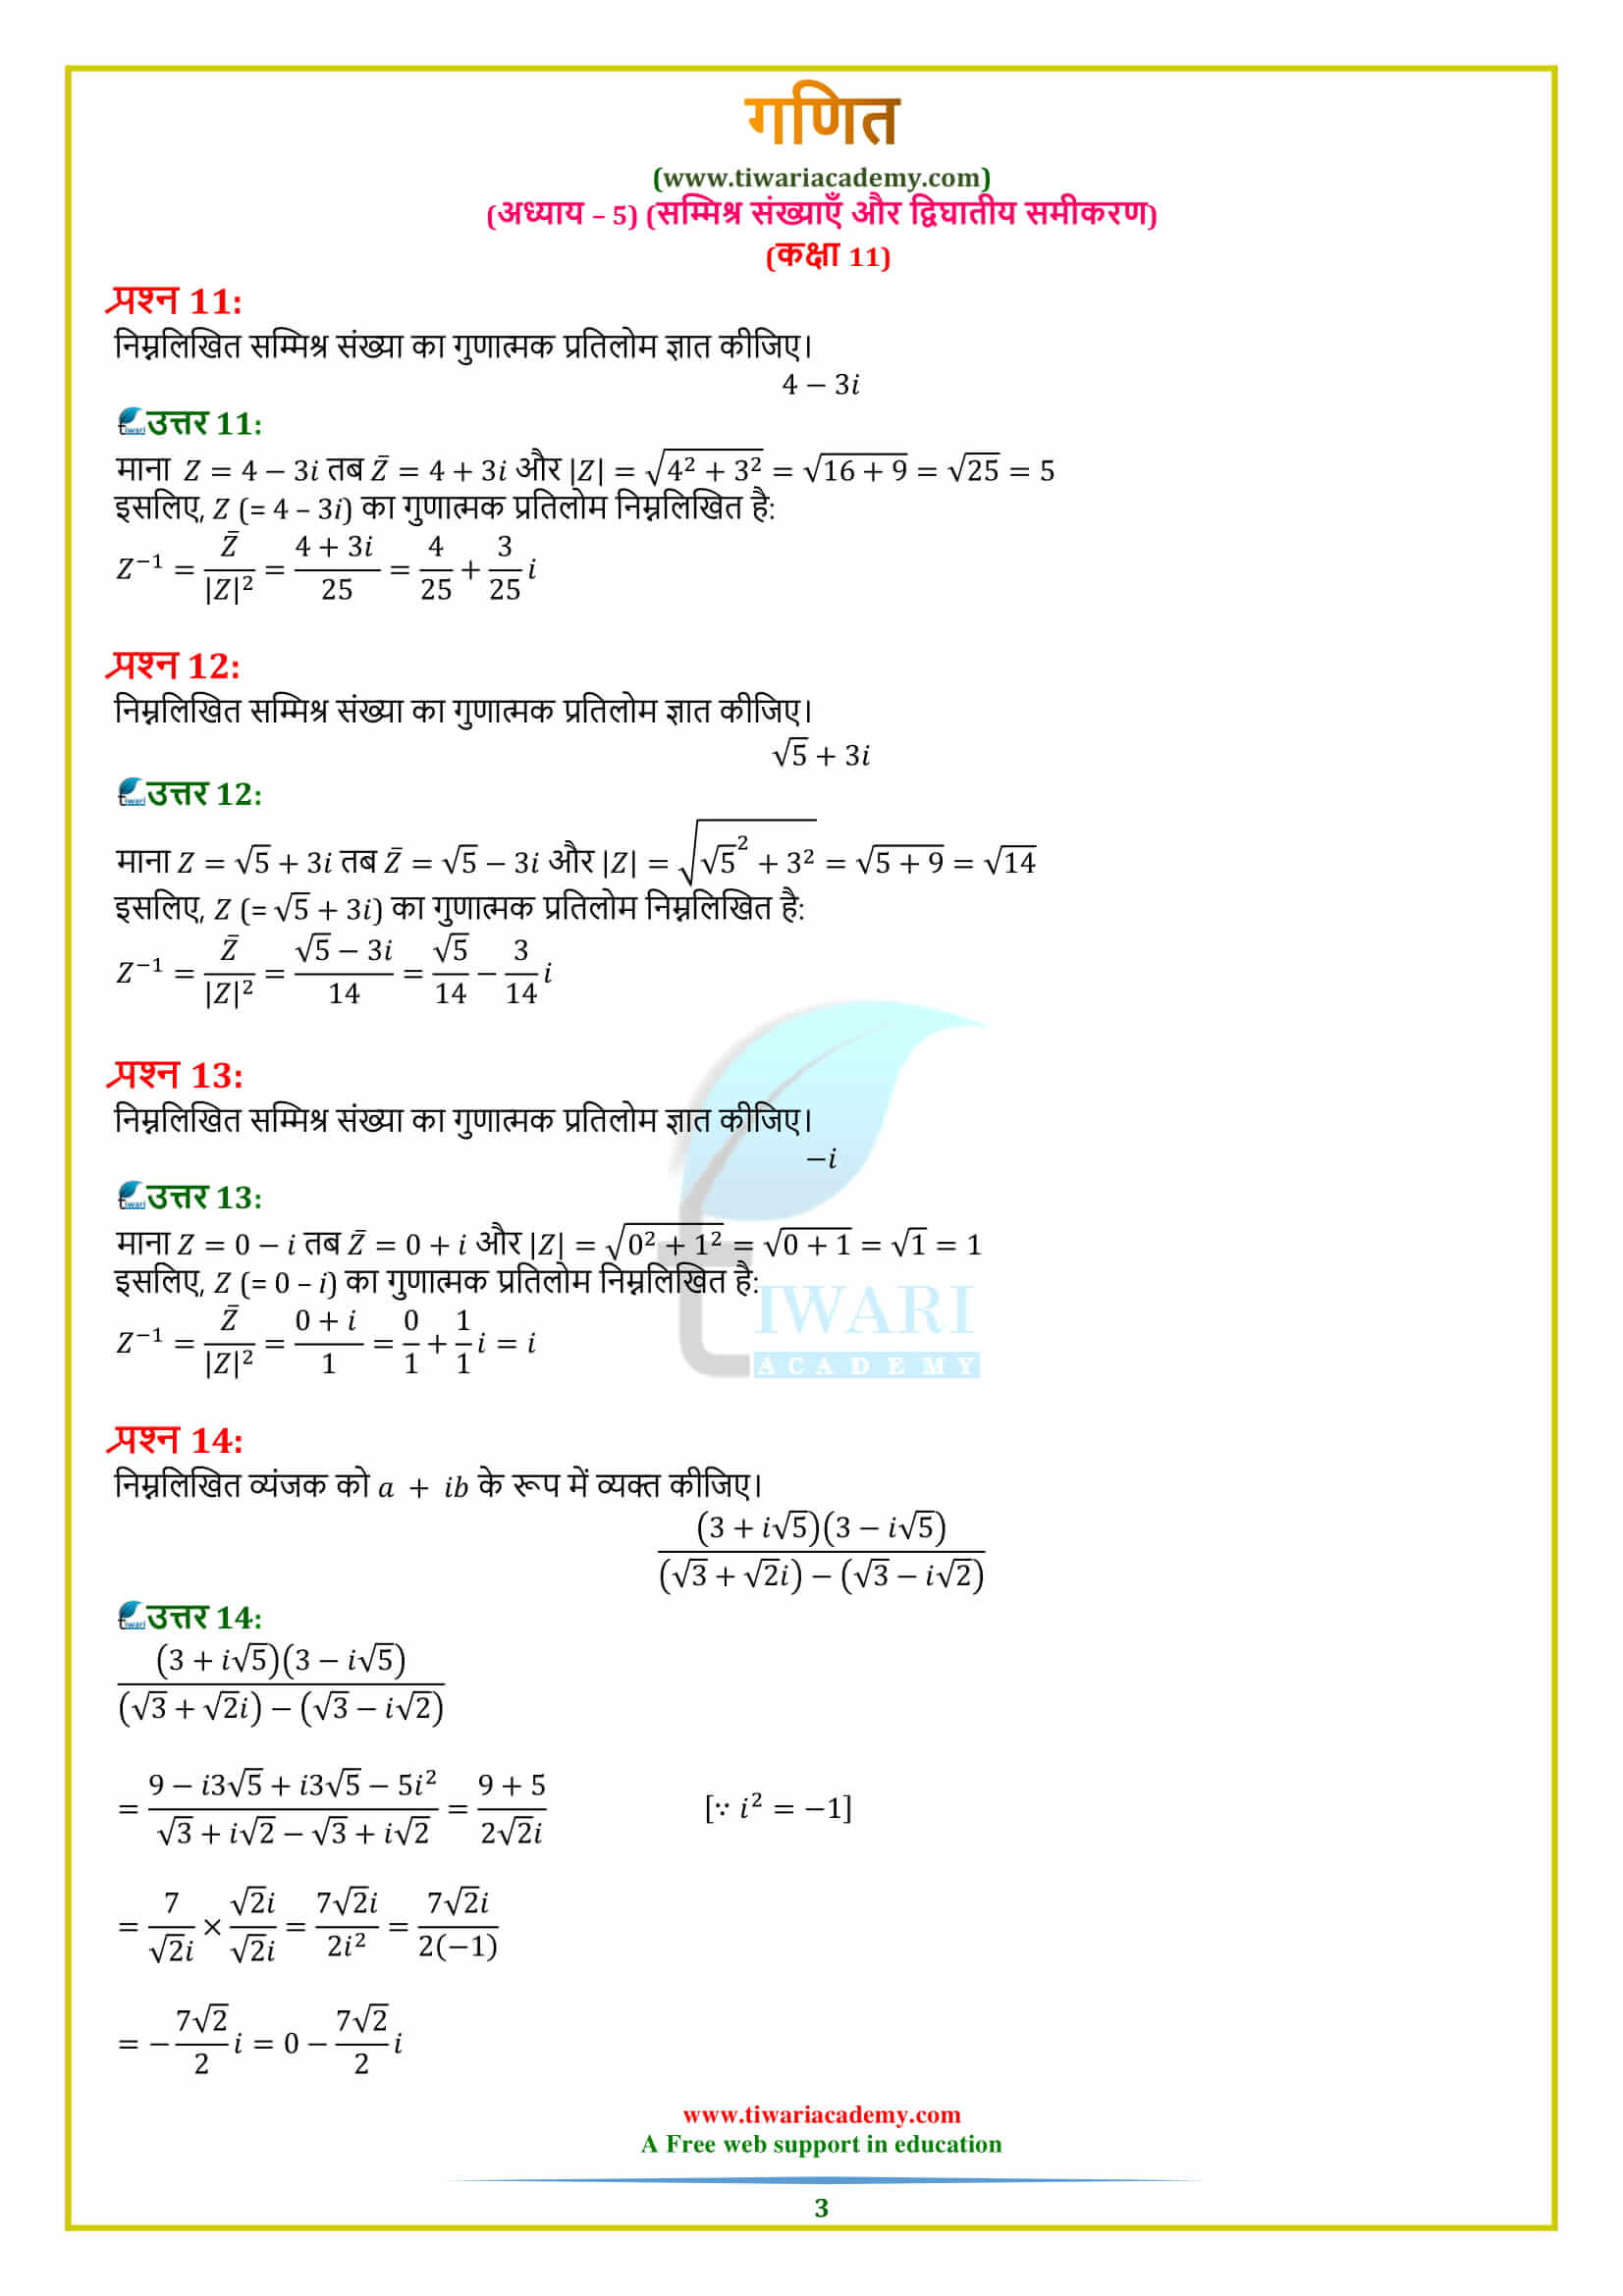 NCERT Solutions for Class 11 Maths Chapter 5 Exercise 5.1 in Hindi guide free